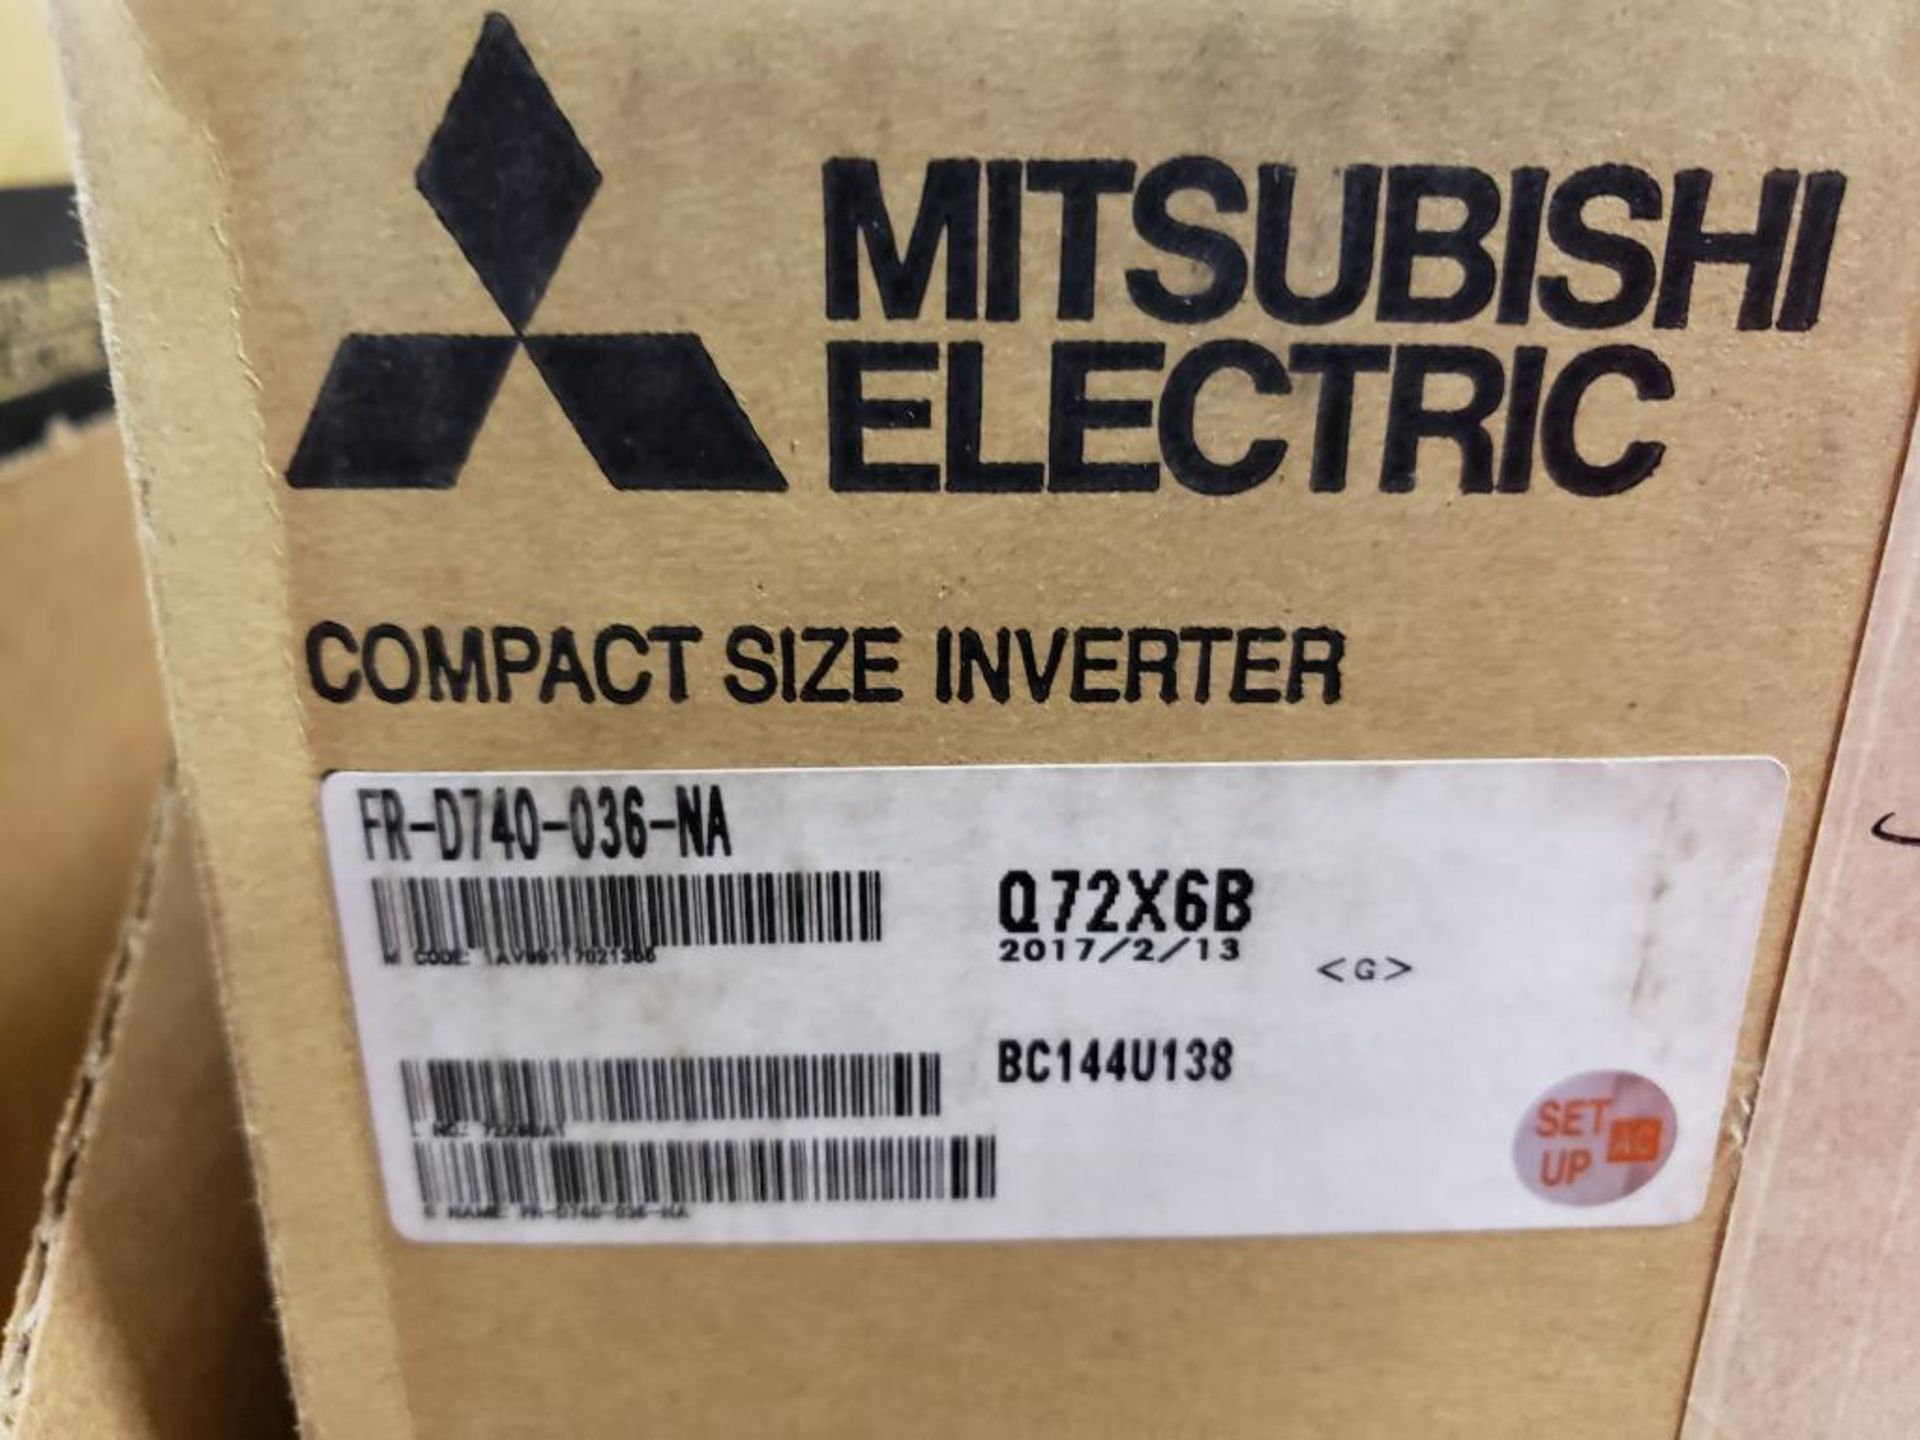 Mitsubishi Electric FR-D740-036-NA compact size inverter. New in box. - Image 2 of 4